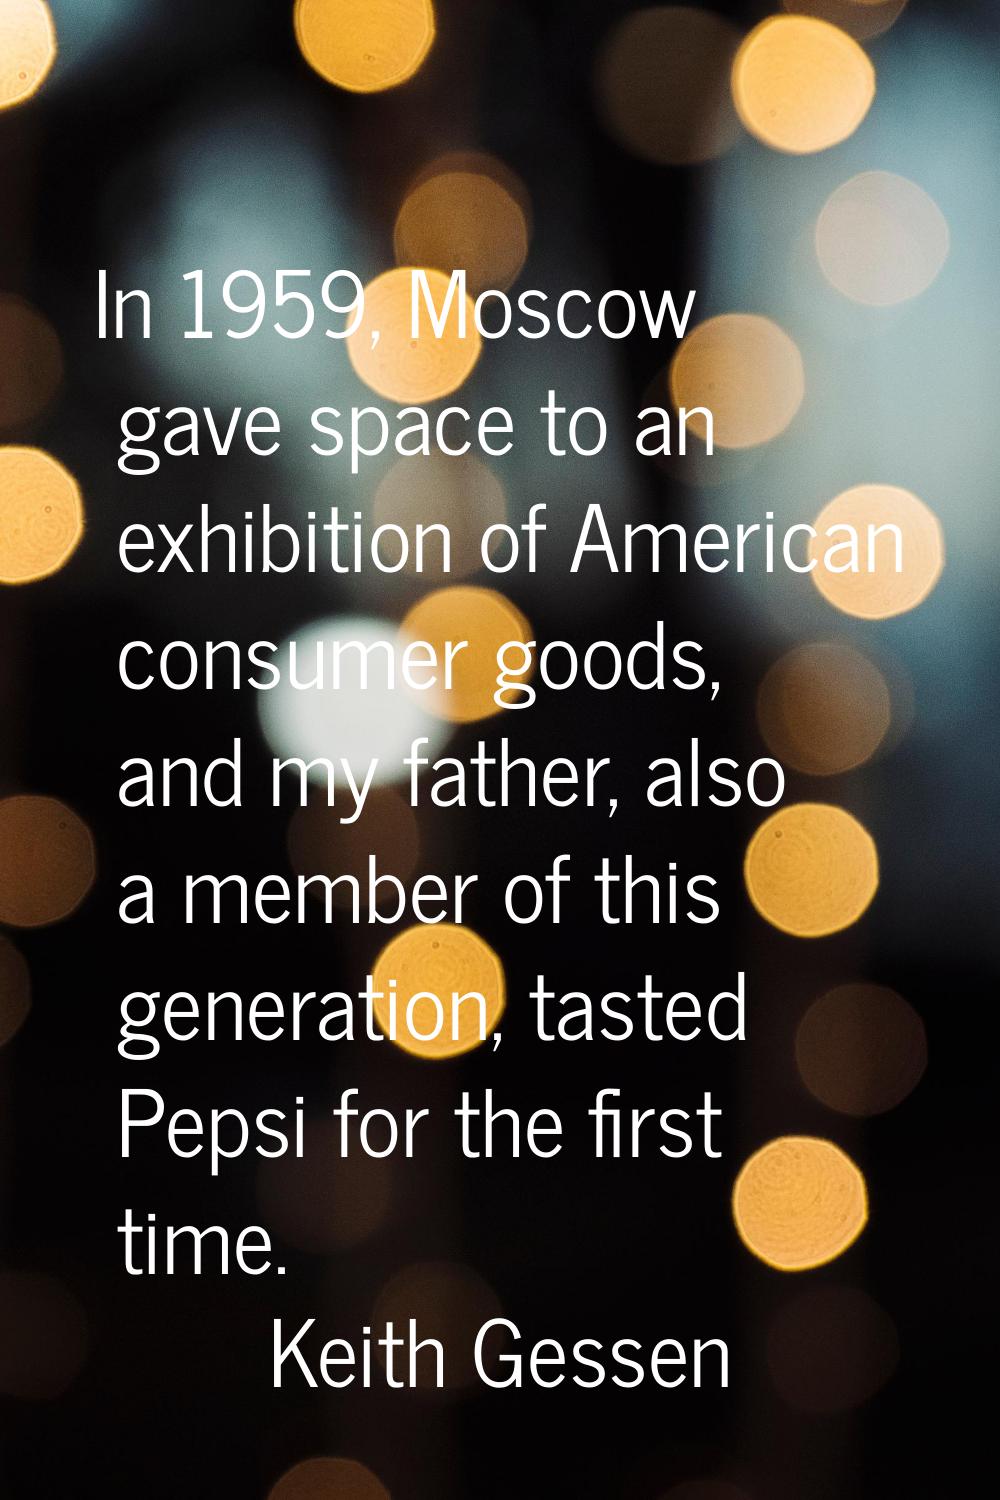 In 1959, Moscow gave space to an exhibition of American consumer goods, and my father, also a membe